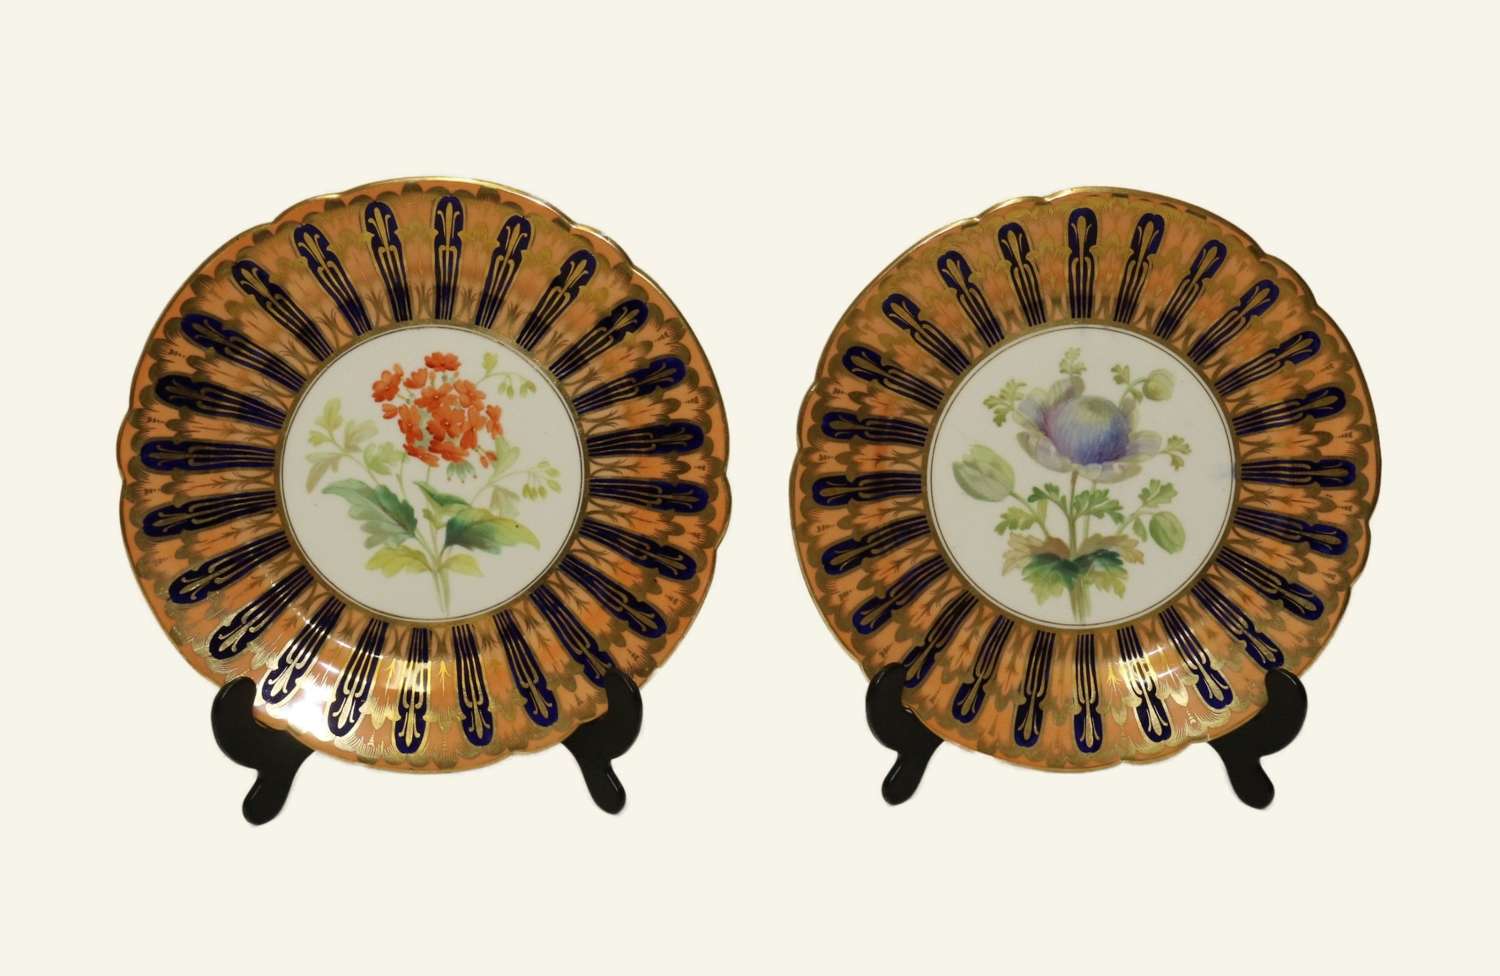 A Fine Pair Of Coalport Cabinet Plates Attributed To Thomas Dickson